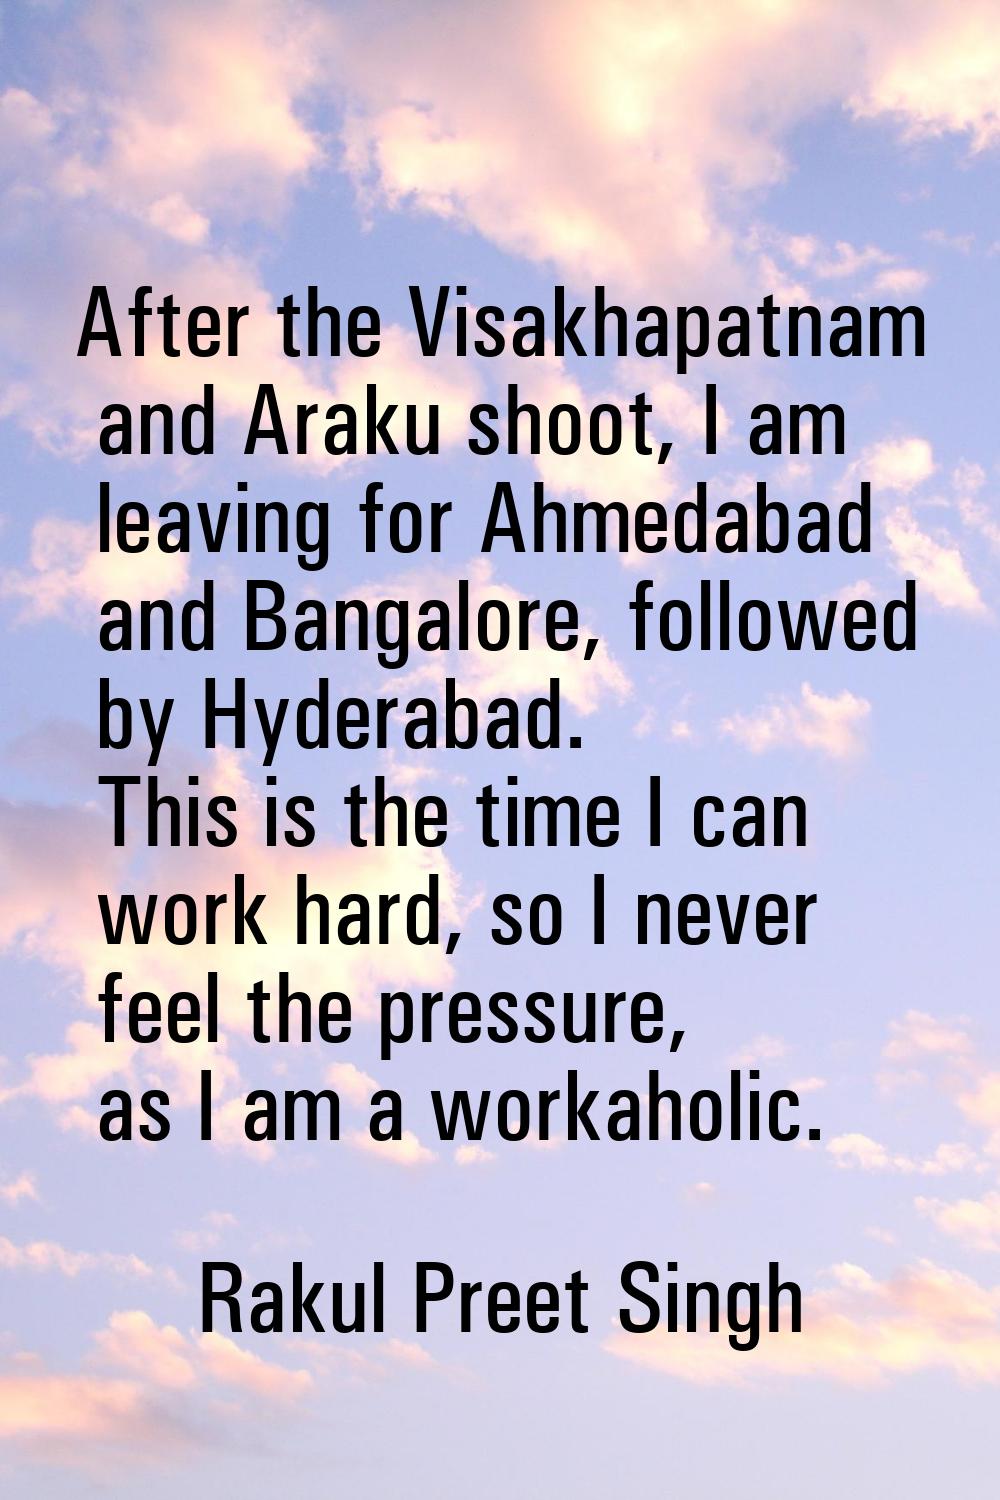 After the Visakhapatnam and Araku shoot, I am leaving for Ahmedabad and Bangalore, followed by Hyde